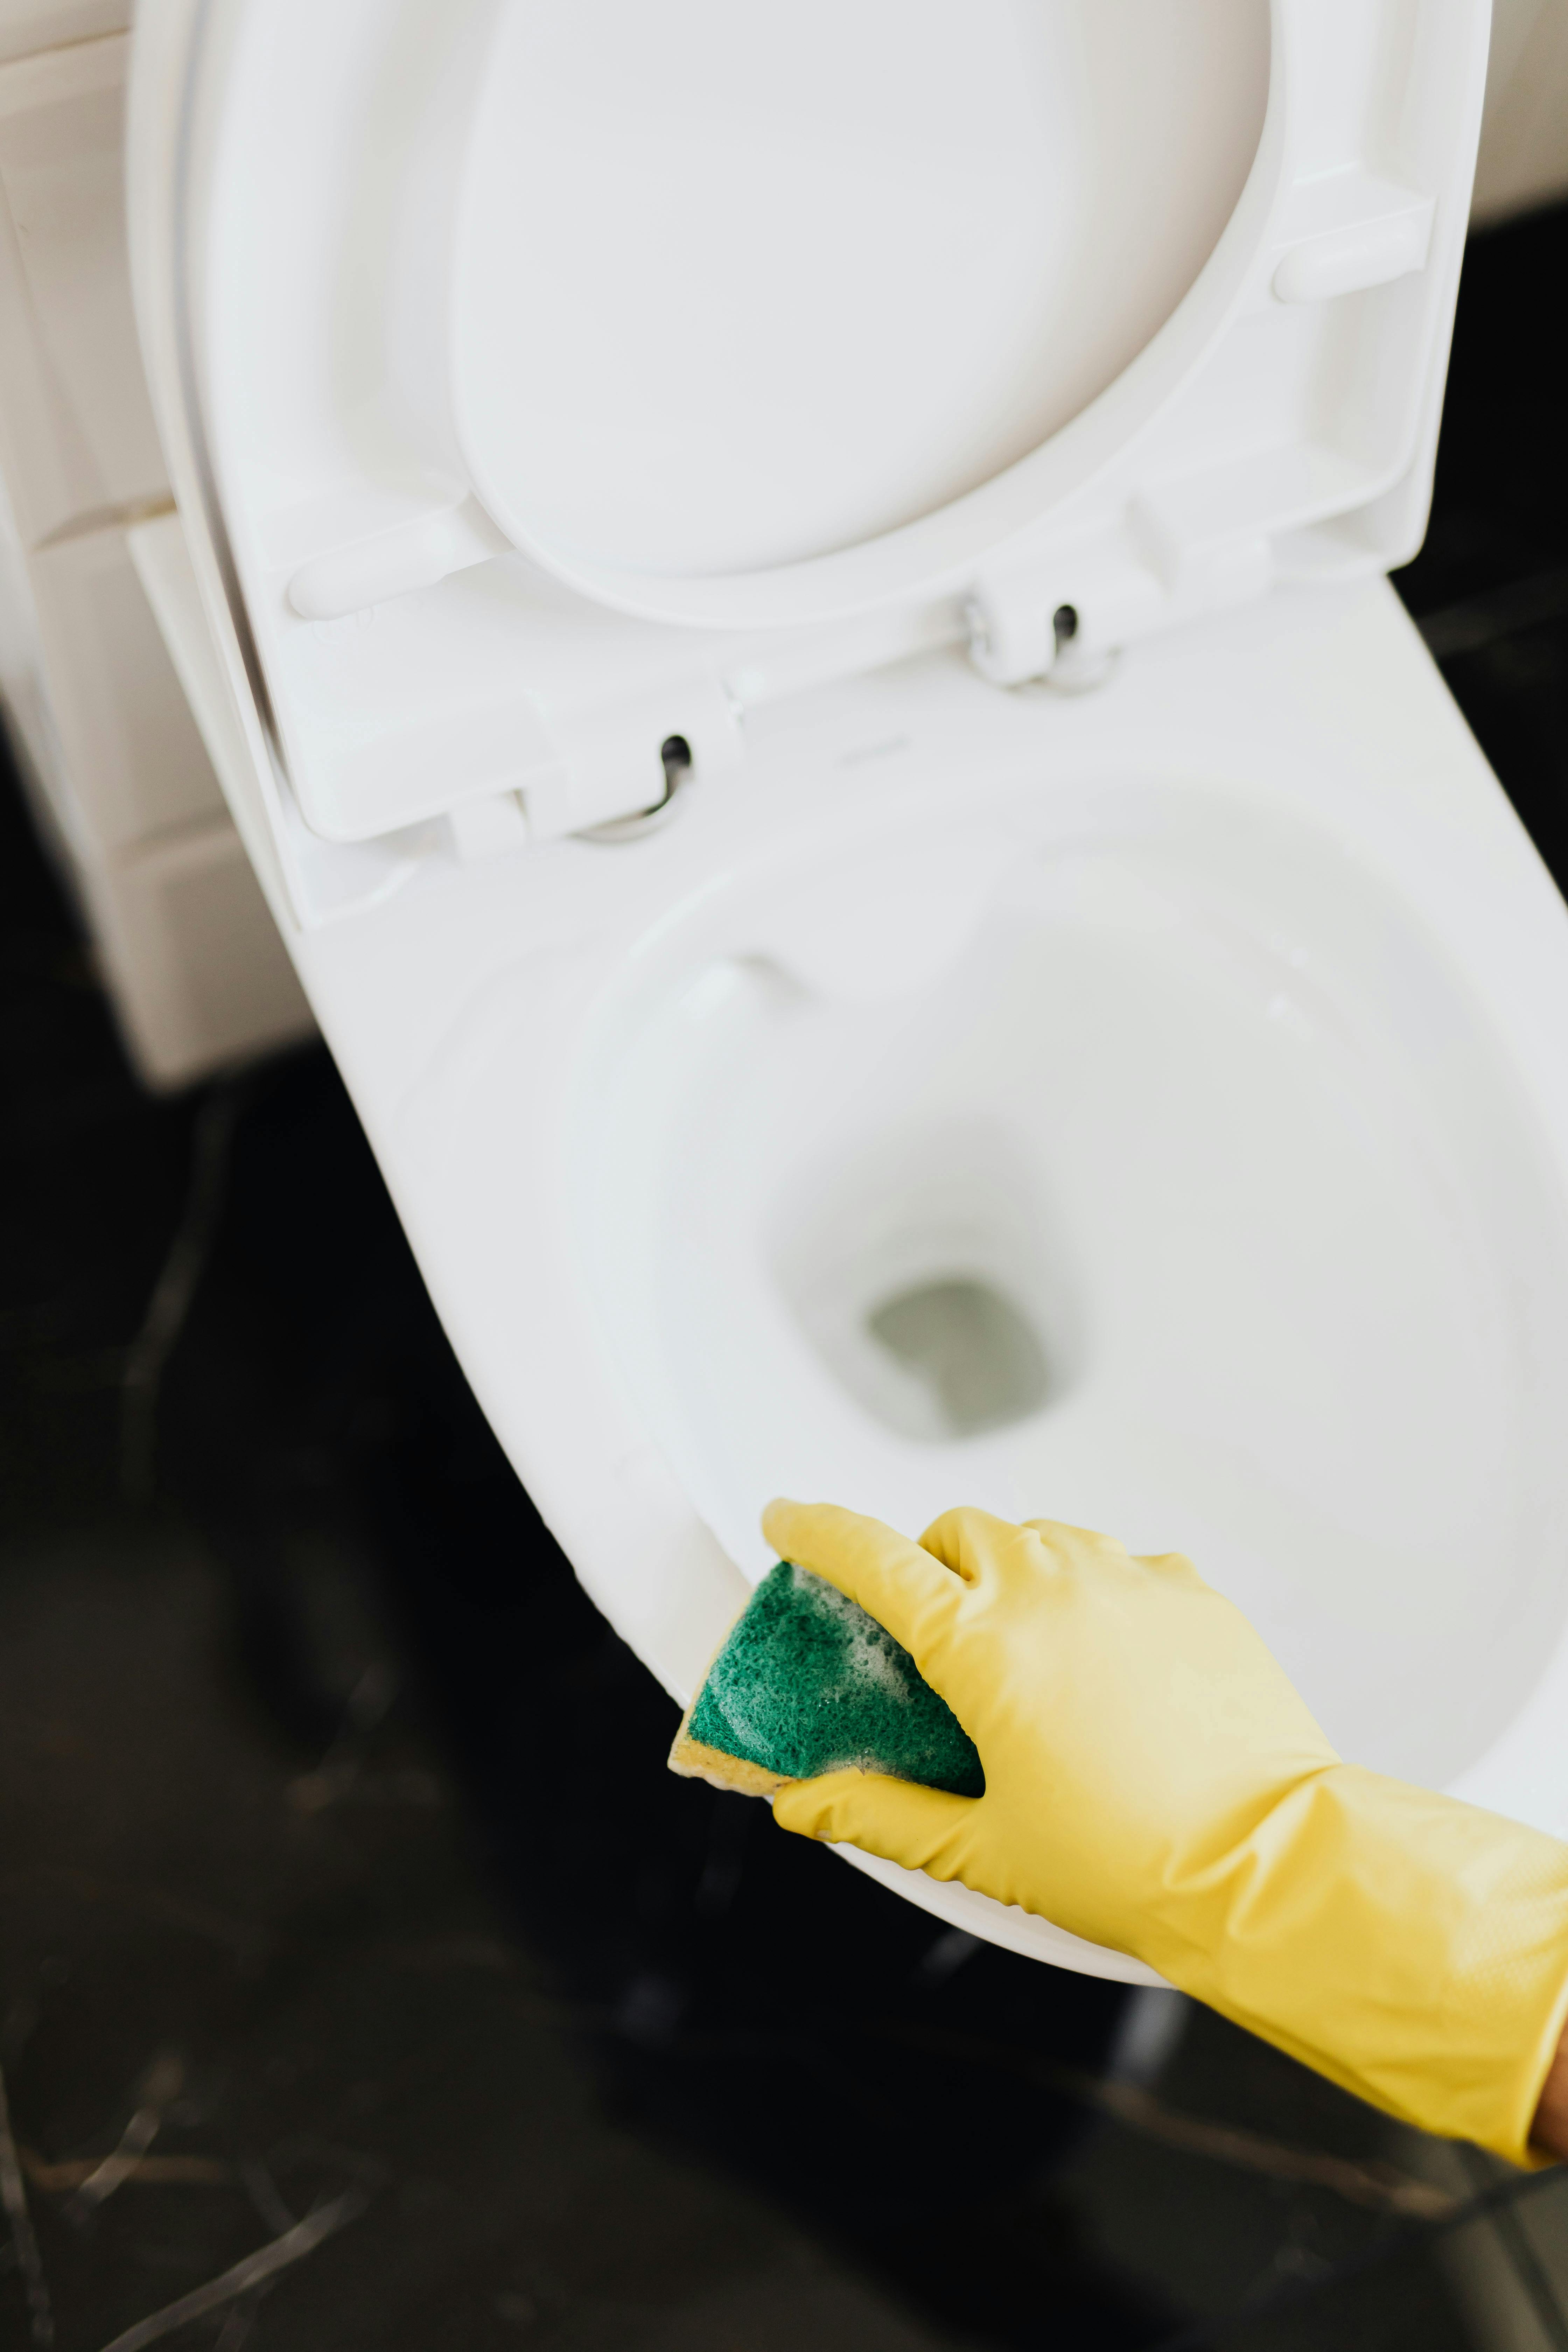 Cleaning Toilet Big Sponge Wearing Rubber Stock Photo 41655961